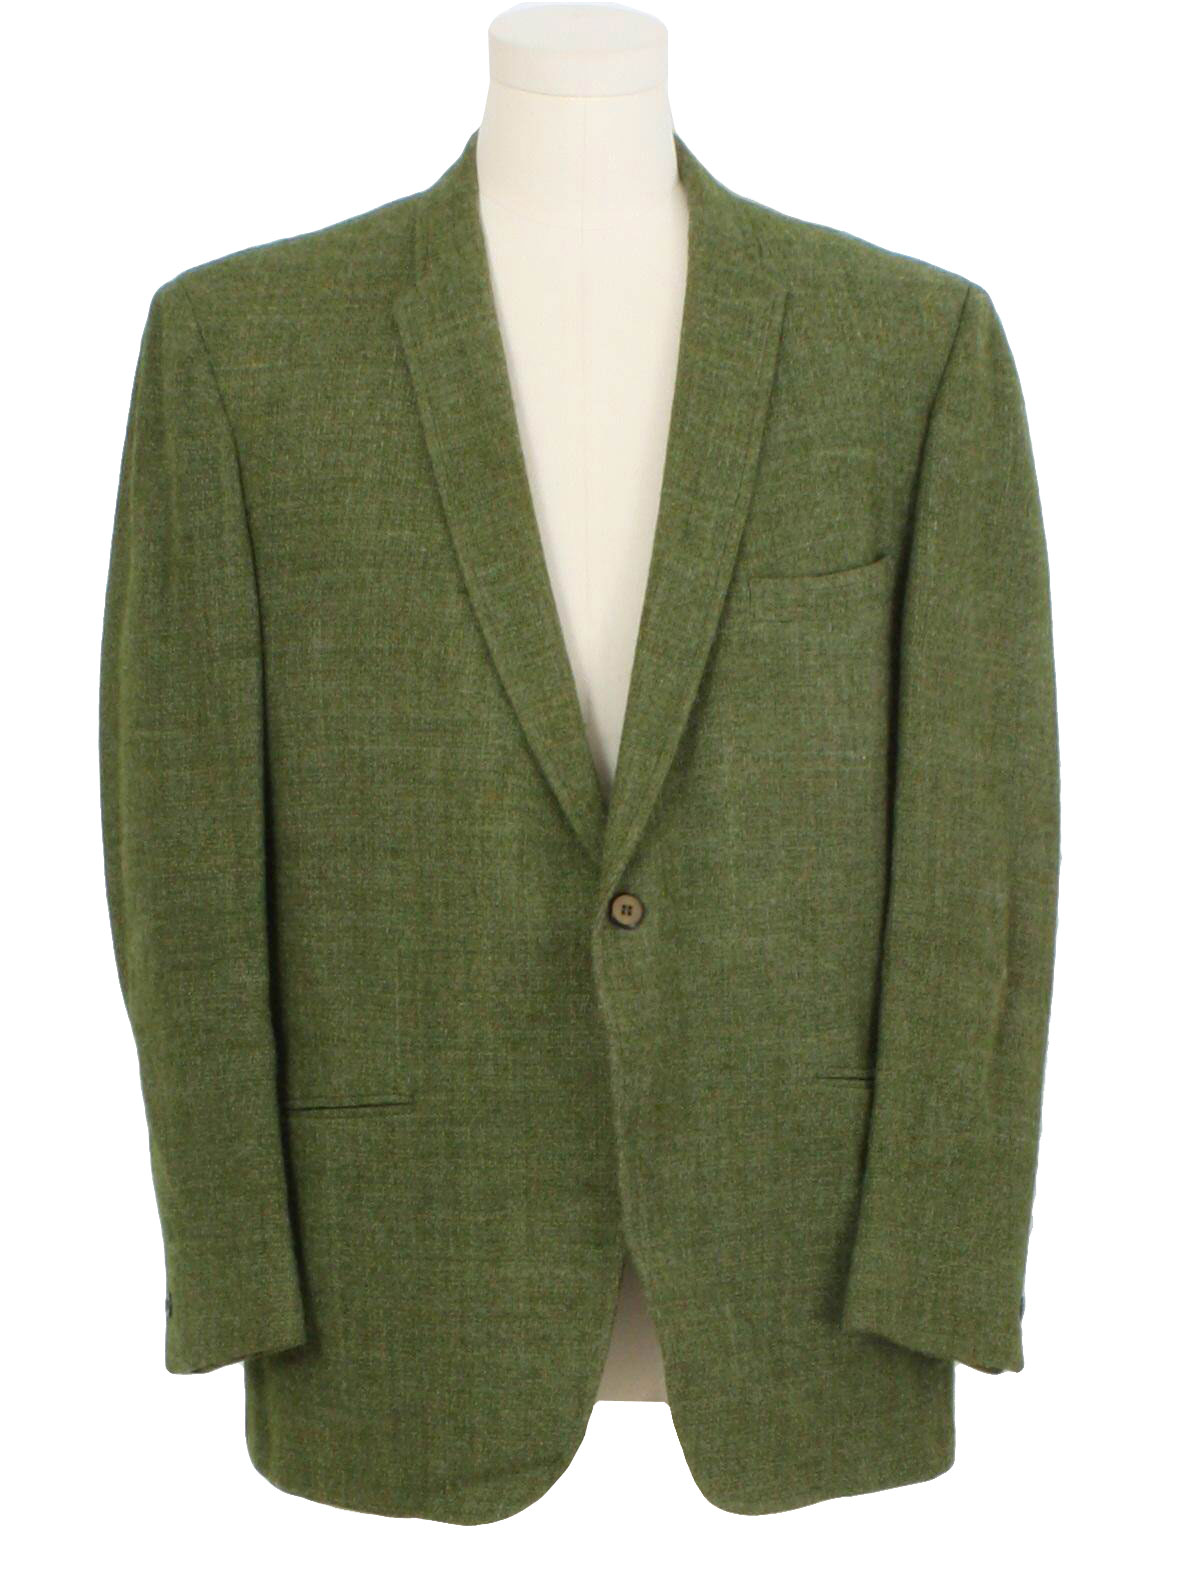 Retro 60's Jacket: 60s -Clubman- Mens olive green heather wool hopsack ...